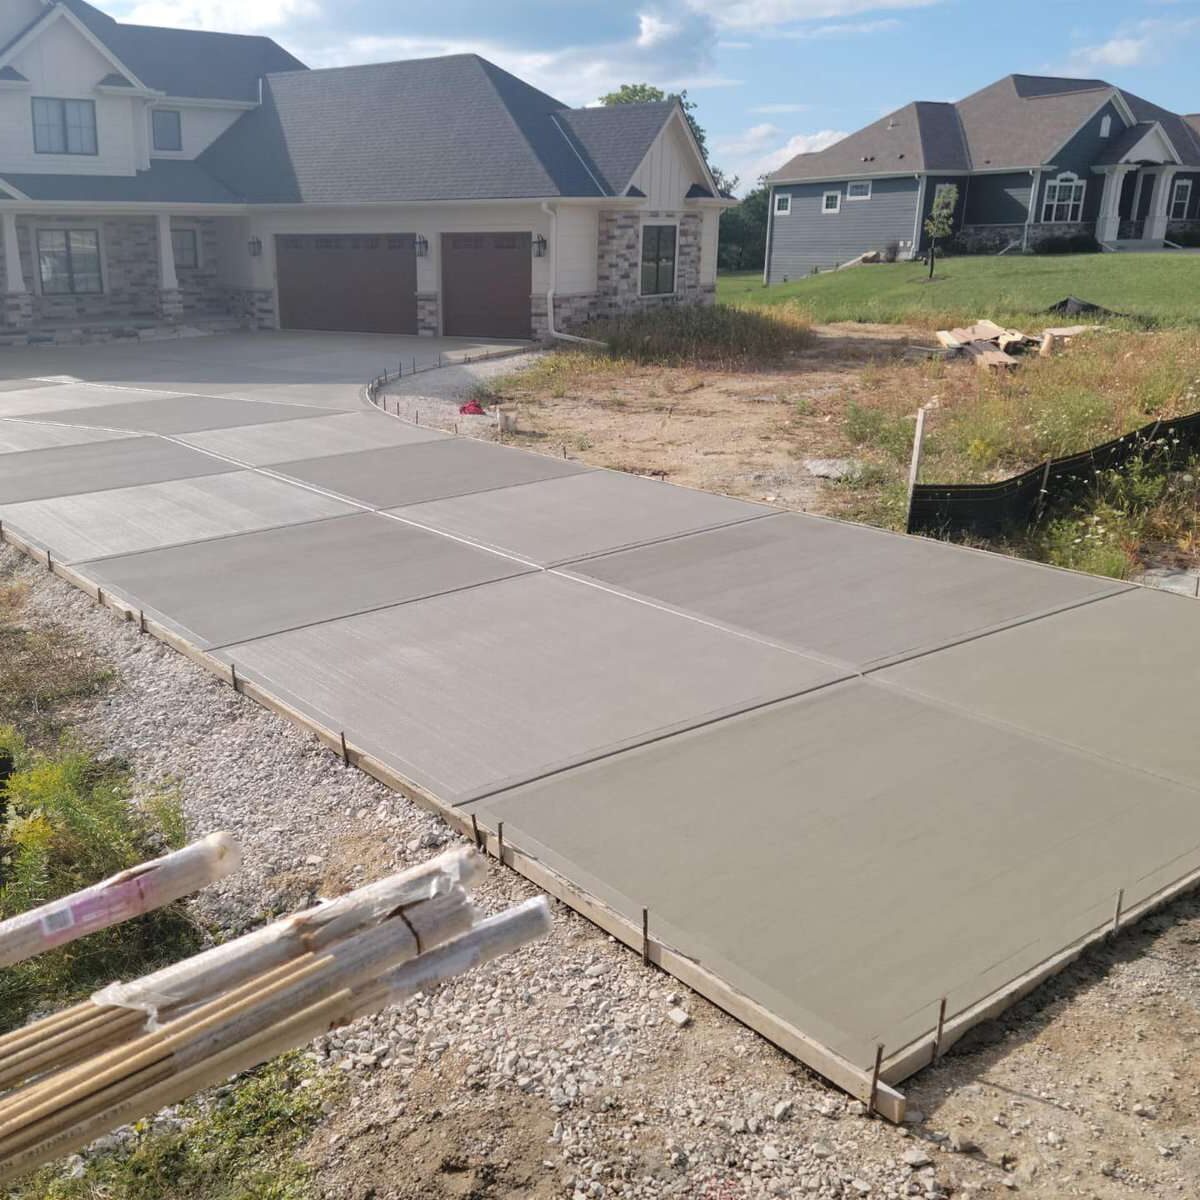 Newly poured concrete driveway leading to a residential garage in a suburban development.